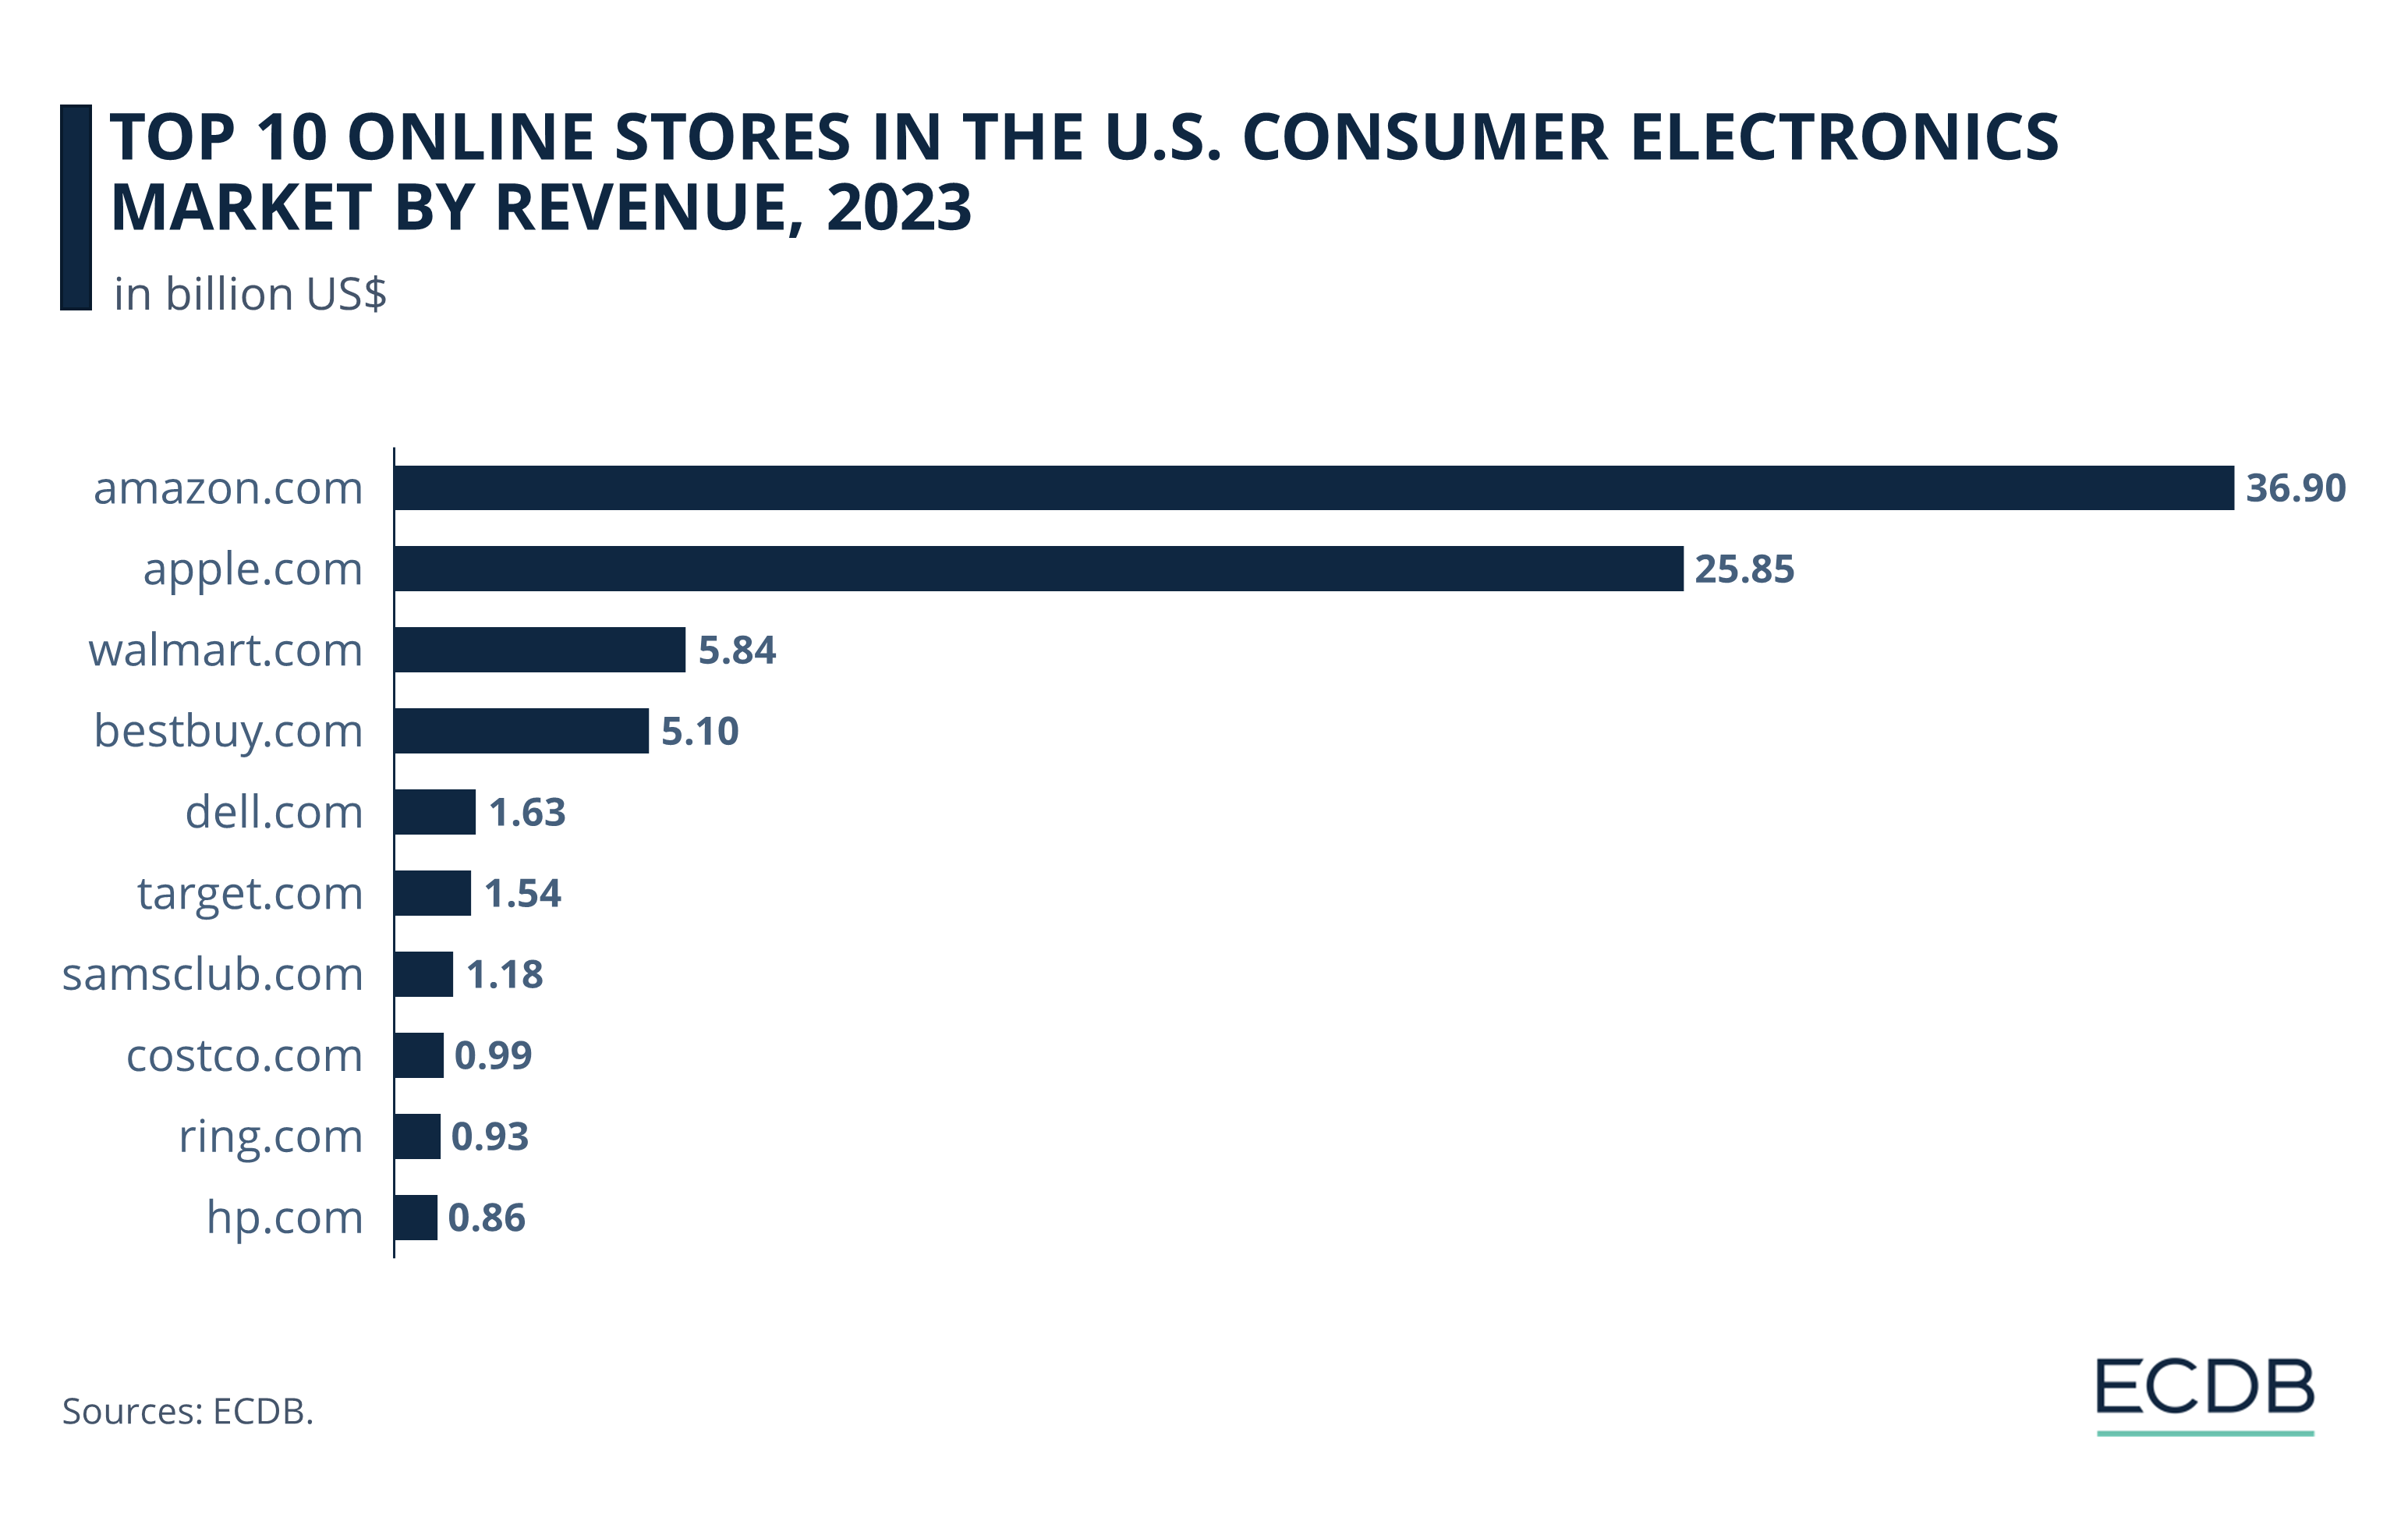 Top 10 Online Stores in the U.S. Consumer Electronics Market by Revenue, 2023